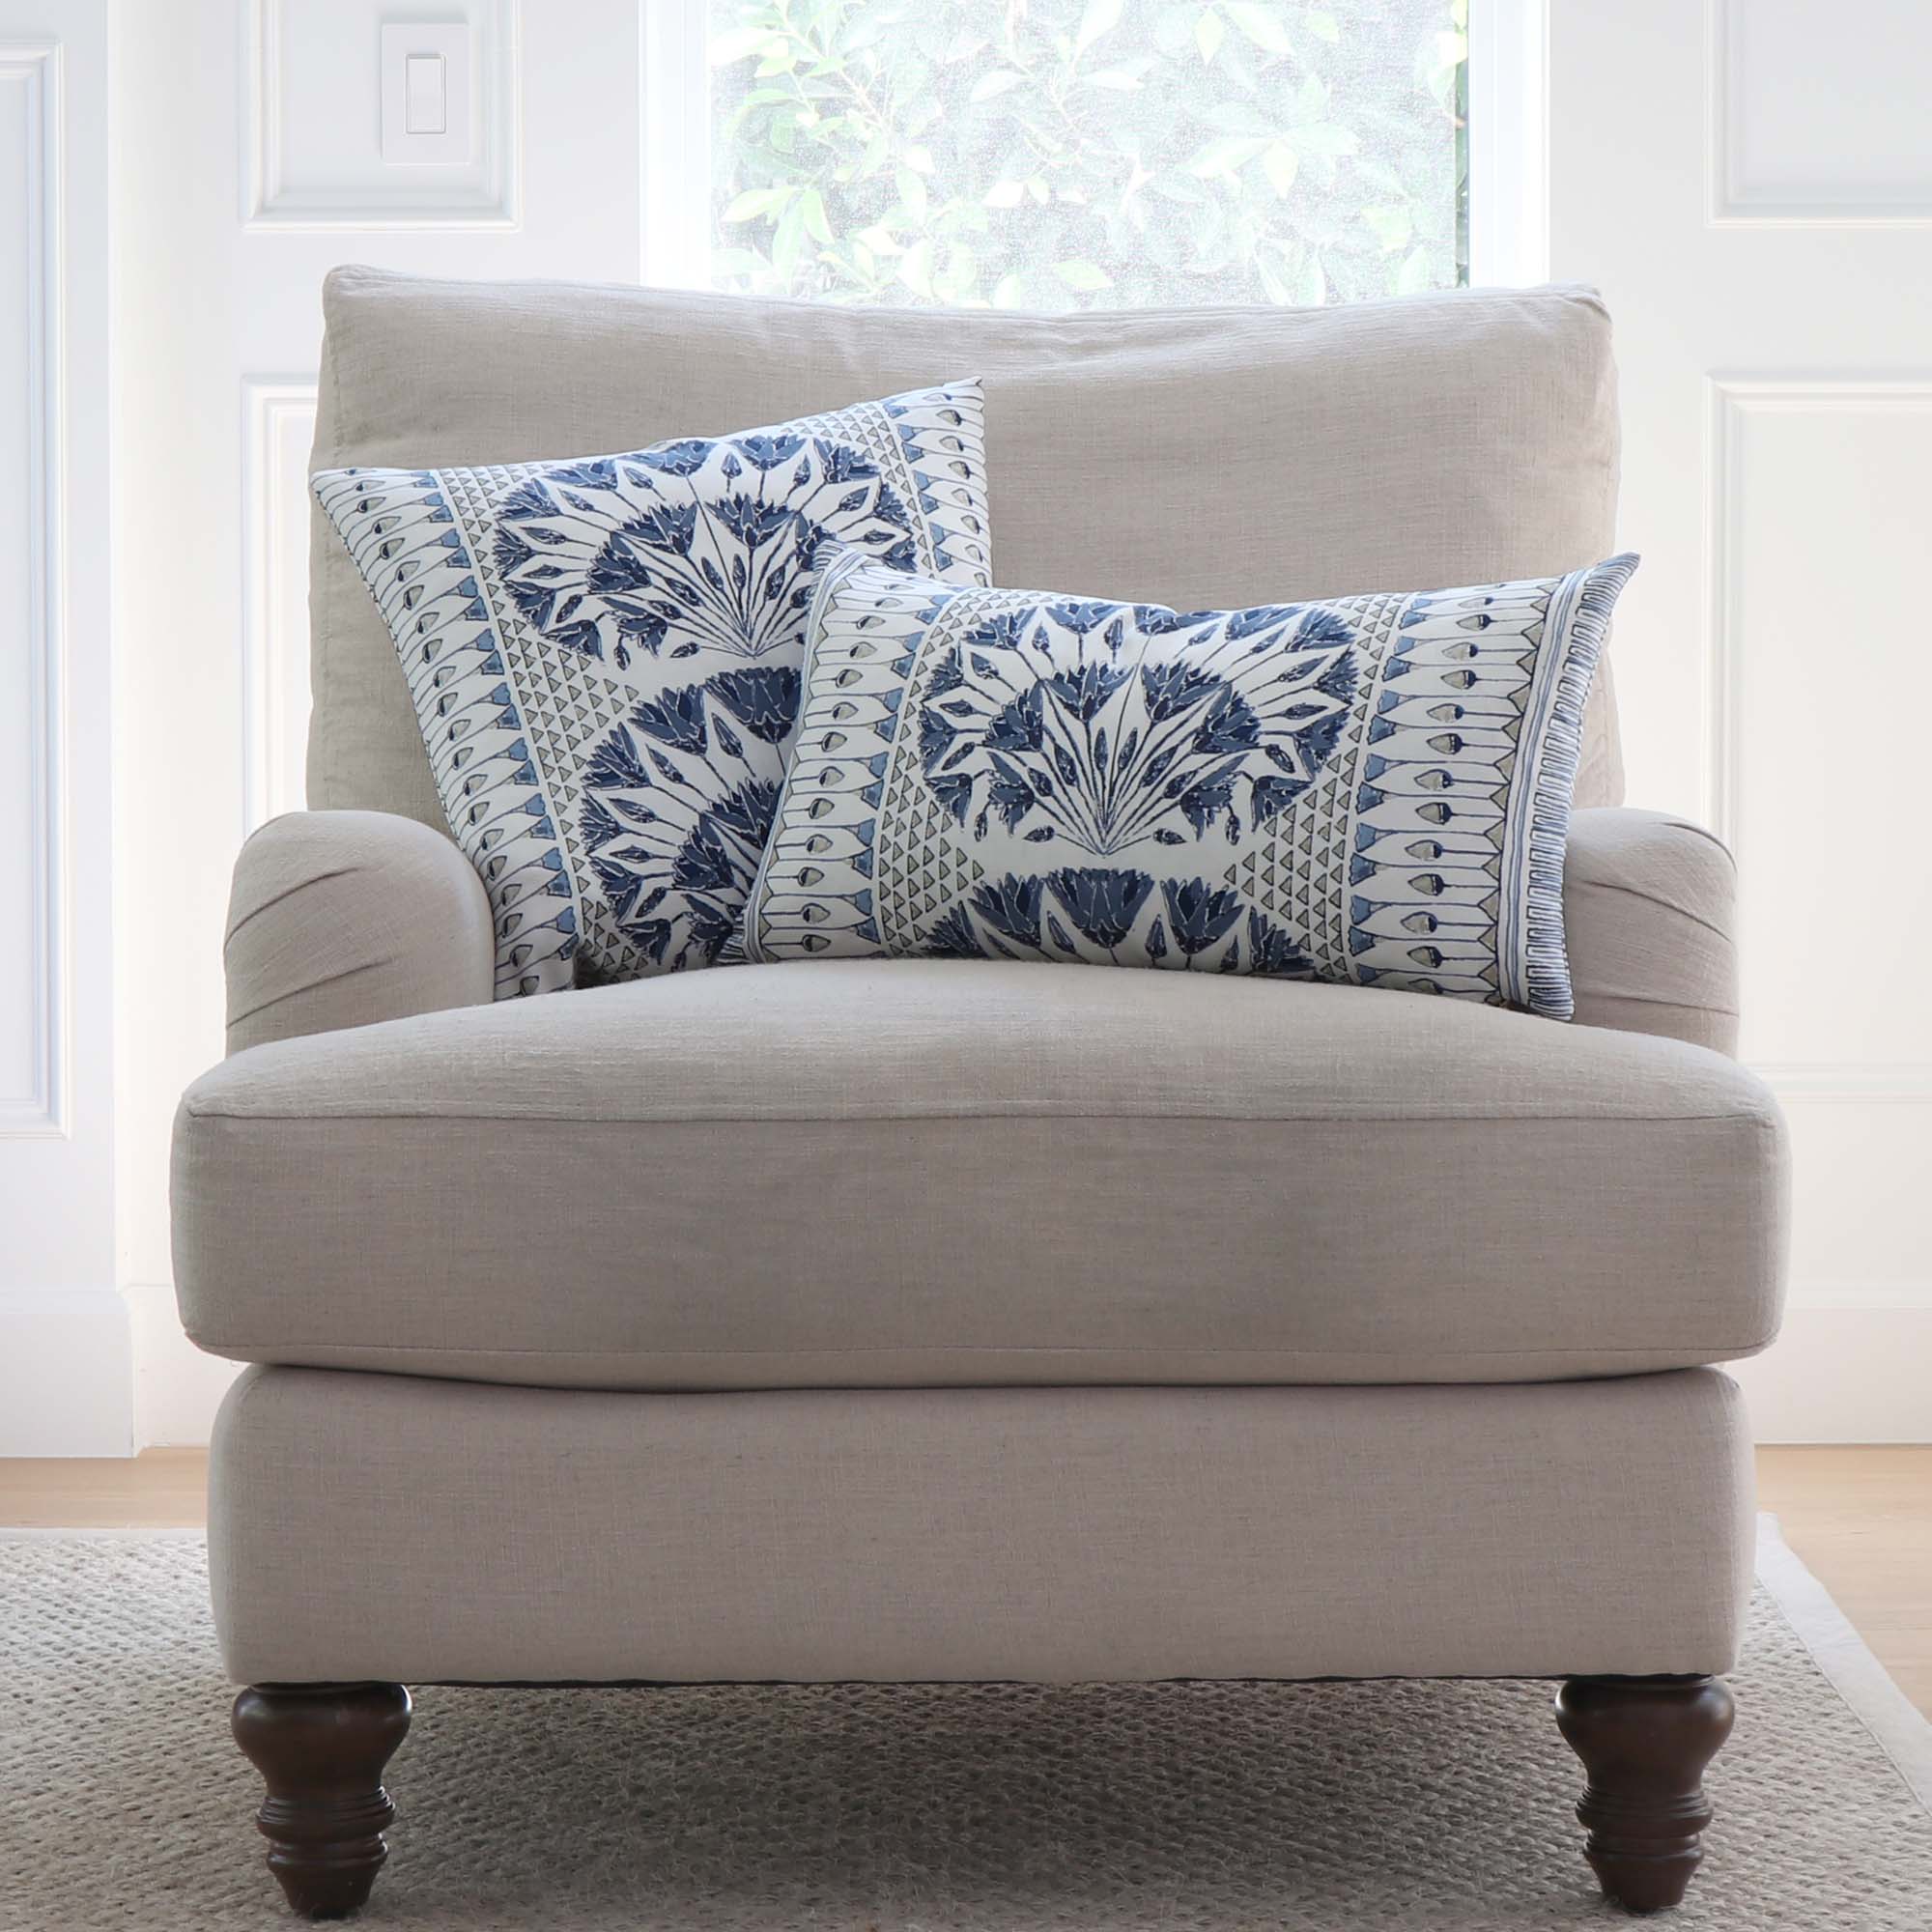 https://www.chloeandolive.com/cdn/shop/products/Thibaut-Anna-French-Cairo-Floral-Blue-White-Designer-Luxury-Throw-Pillow-Cover-on-Upholstered-Accent-Arm-Chair_5000x.jpg?v=1627834238